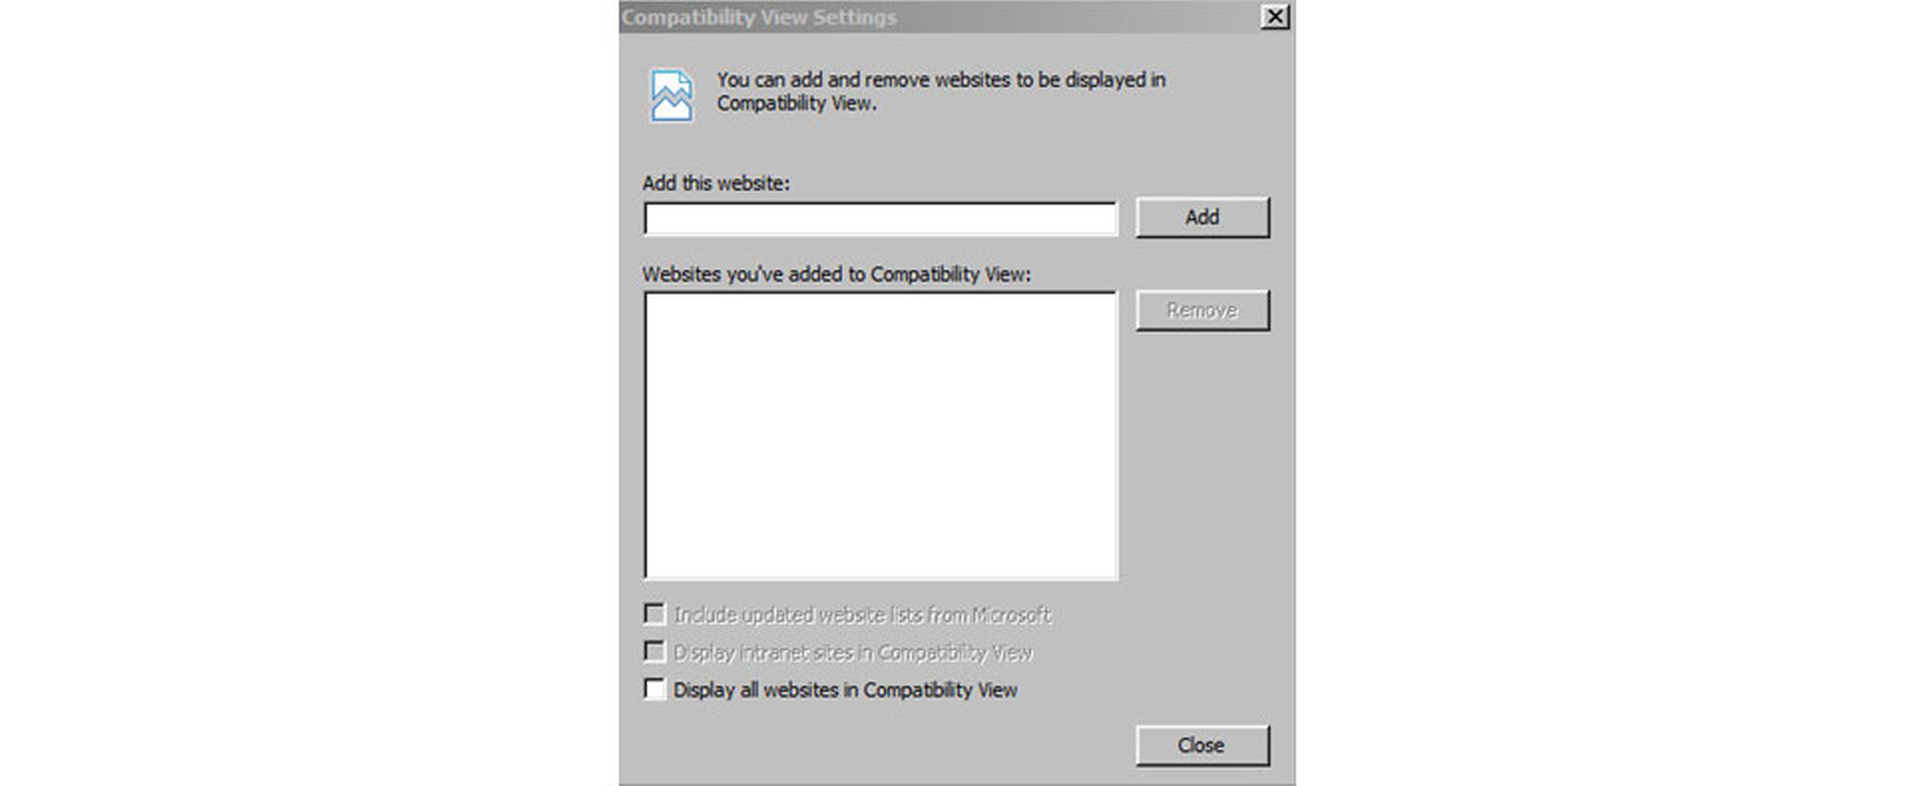 Compatibility View Setting in Internet Explorer